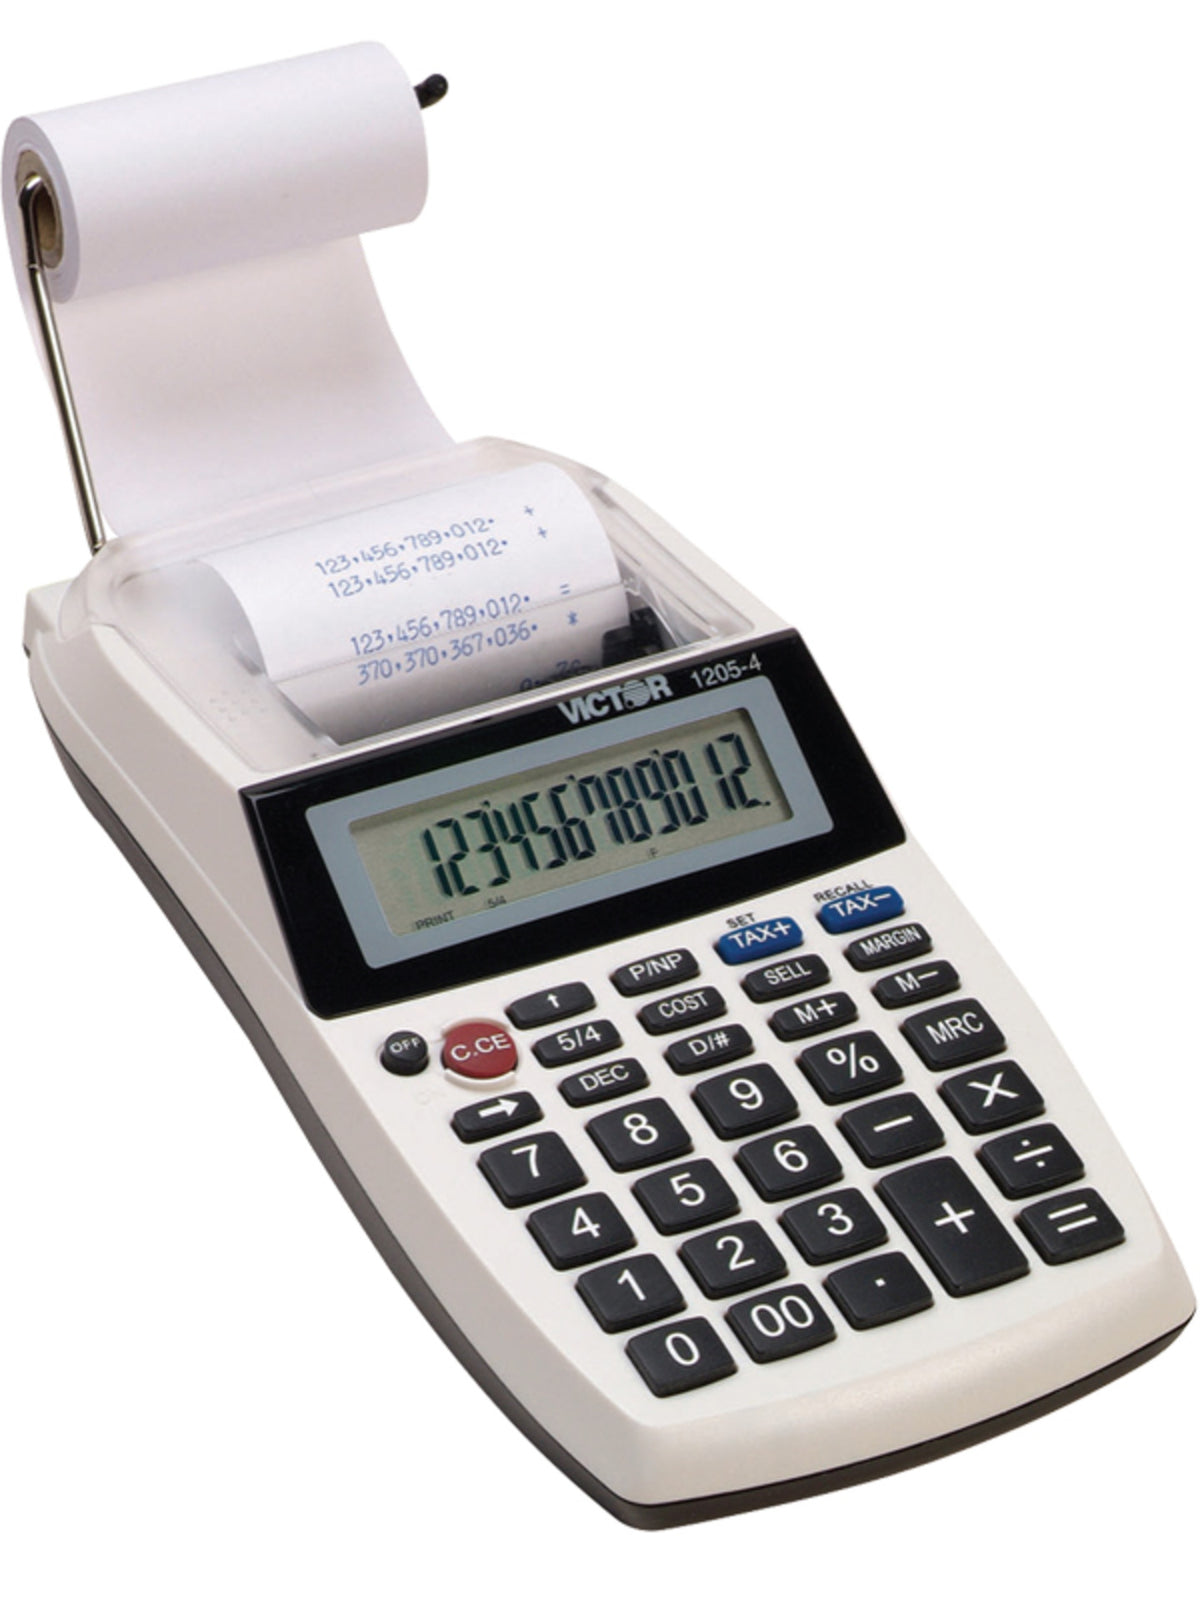 Victor 1205-4 Large LCD 12-Digit Palm/Desktop Commercial Printing Calculator